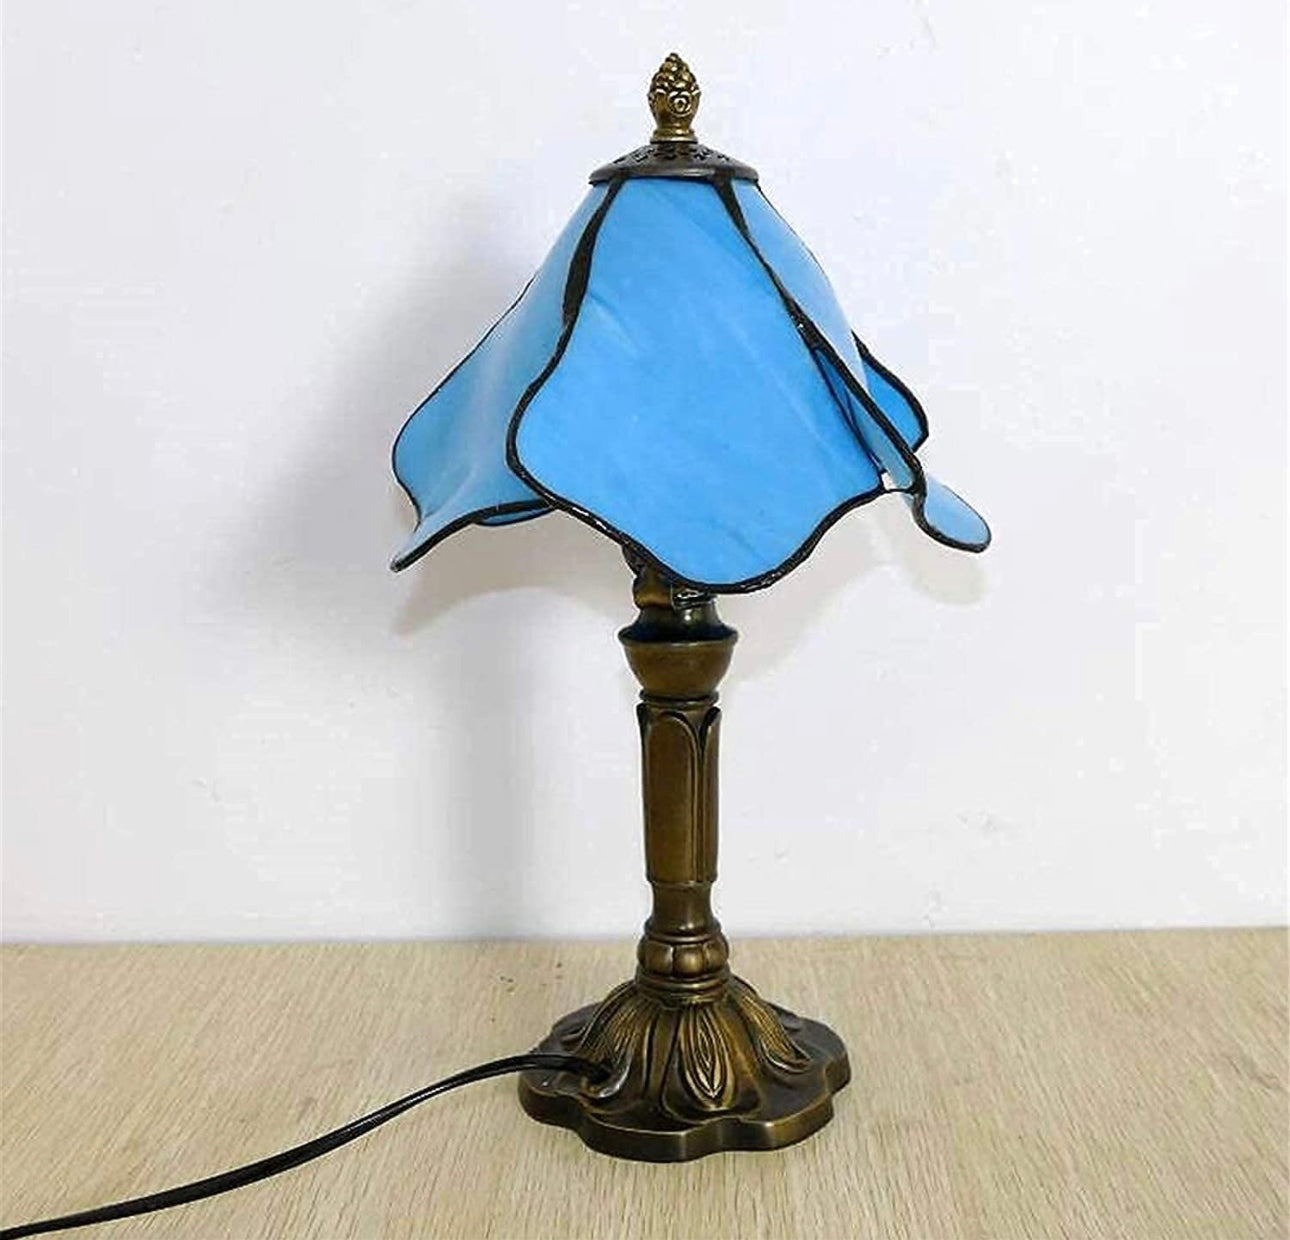 Vintage Tiffany Table Lamp Copper Colorful Glass - Lamps